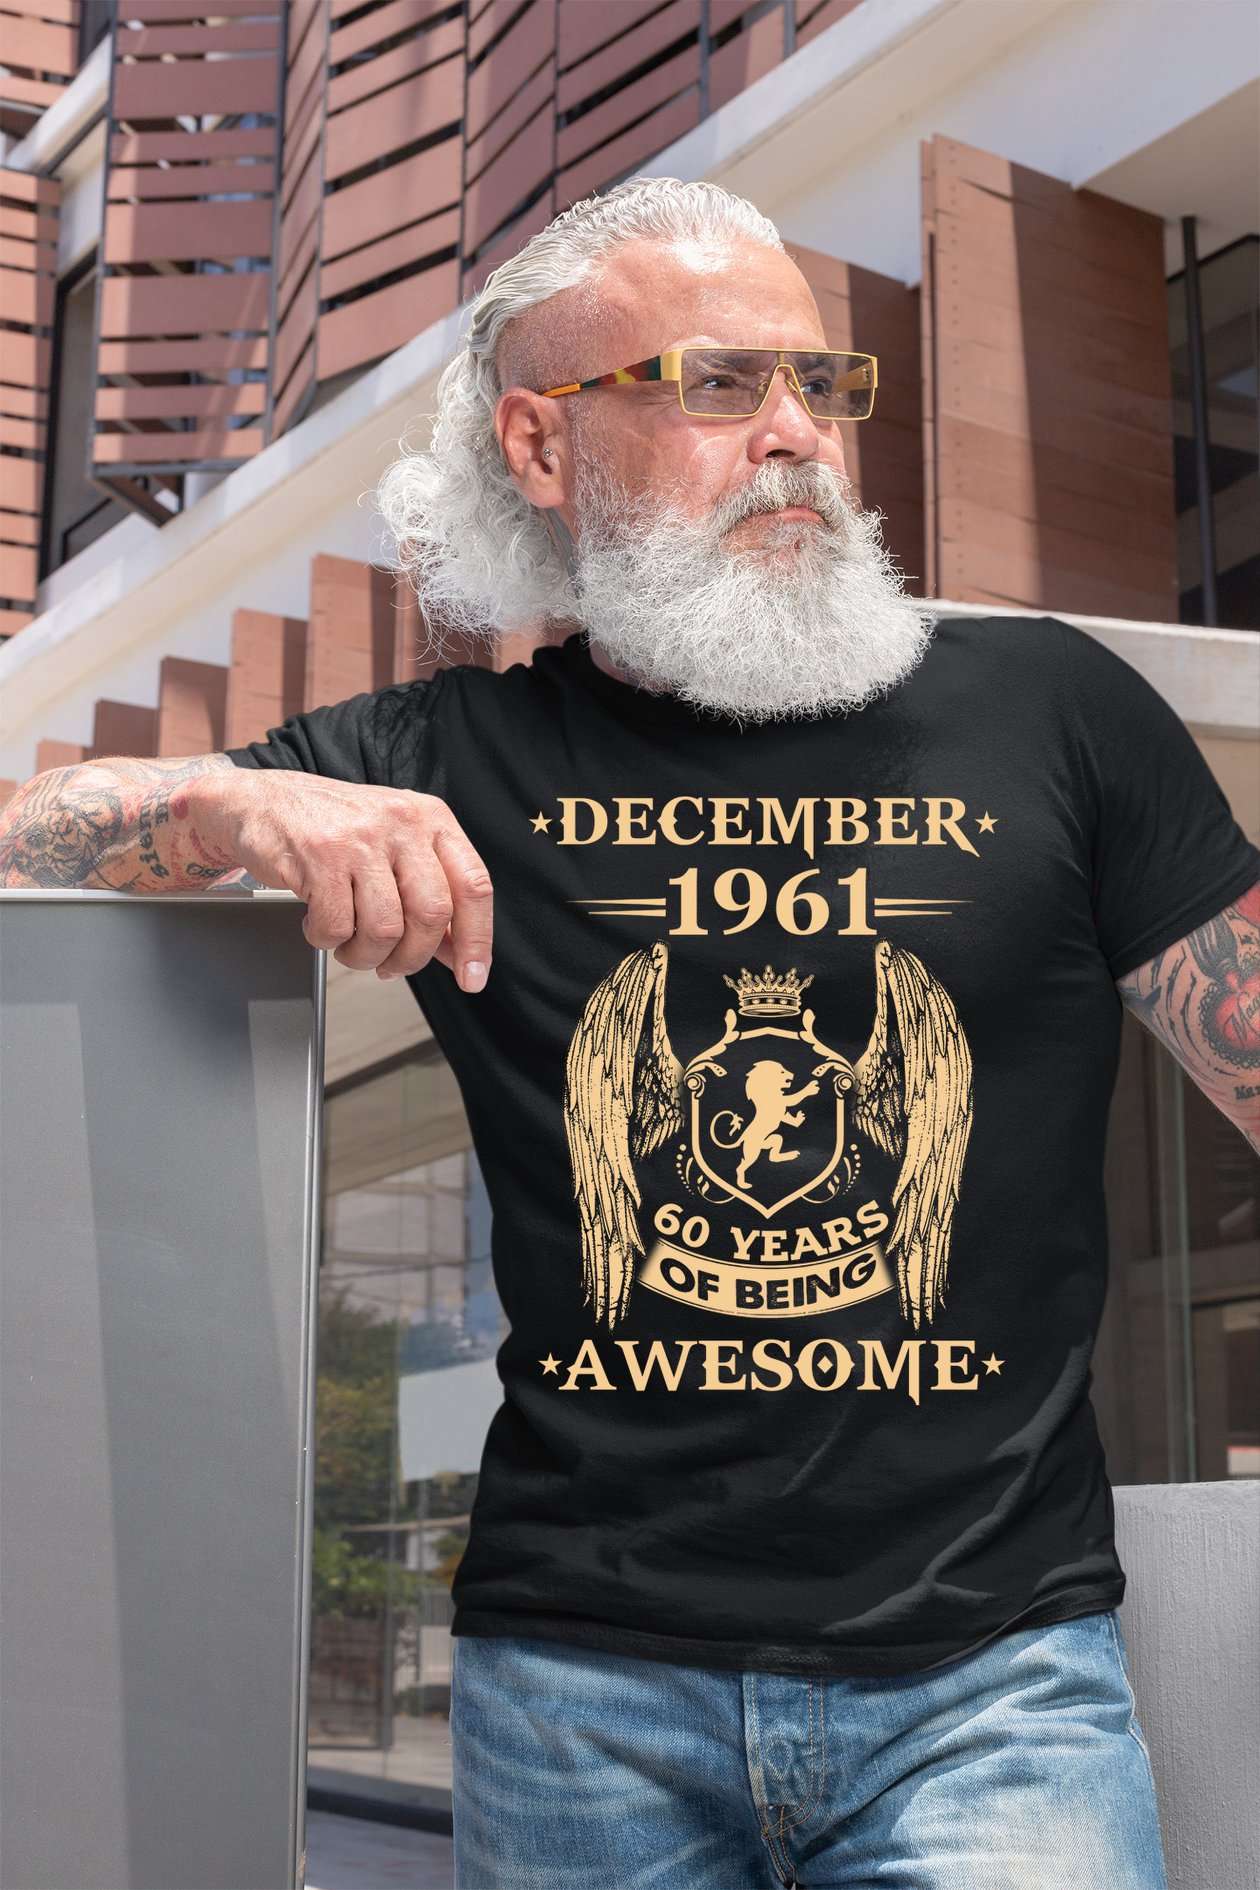 December 1961 60 years of being awesome - Born in December, 60 years old